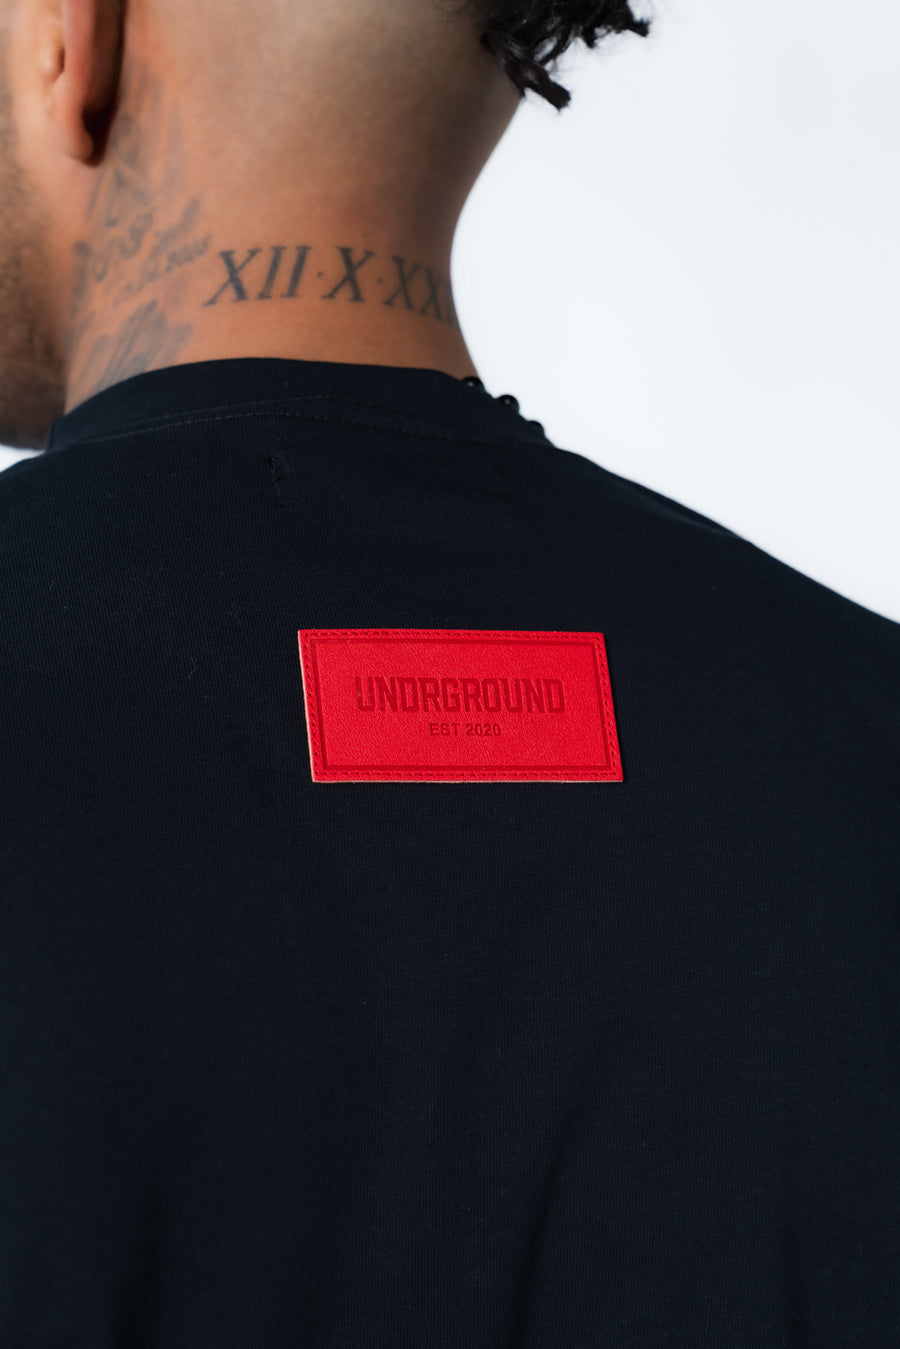 Black/Red Leather Patch Tee